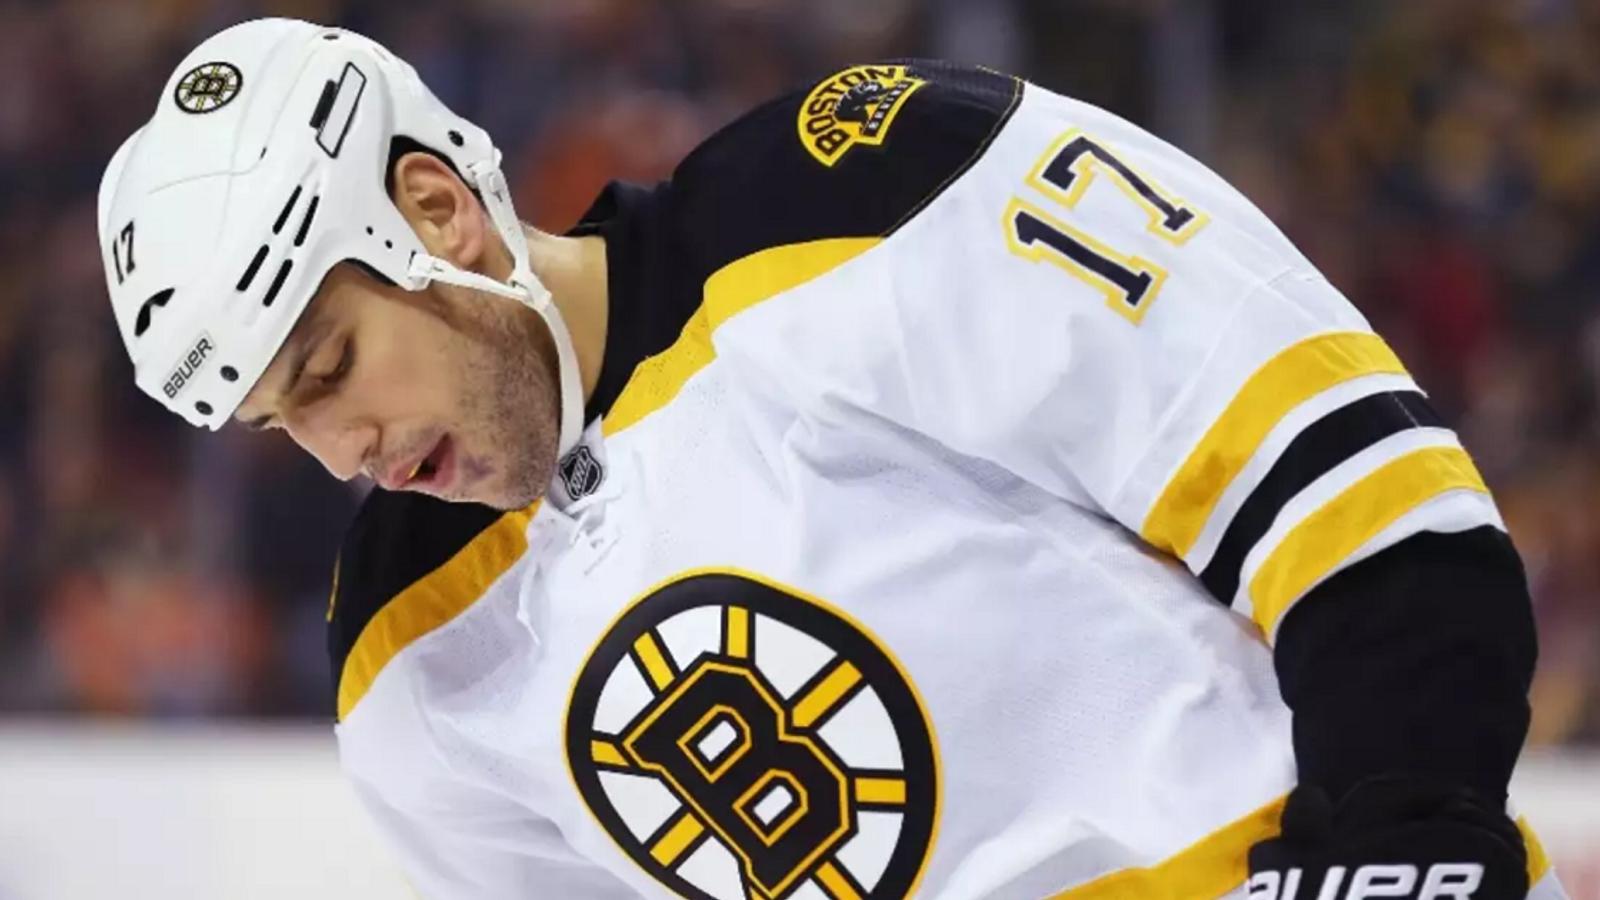 Police report sheds new light on Milan Lucic incident.